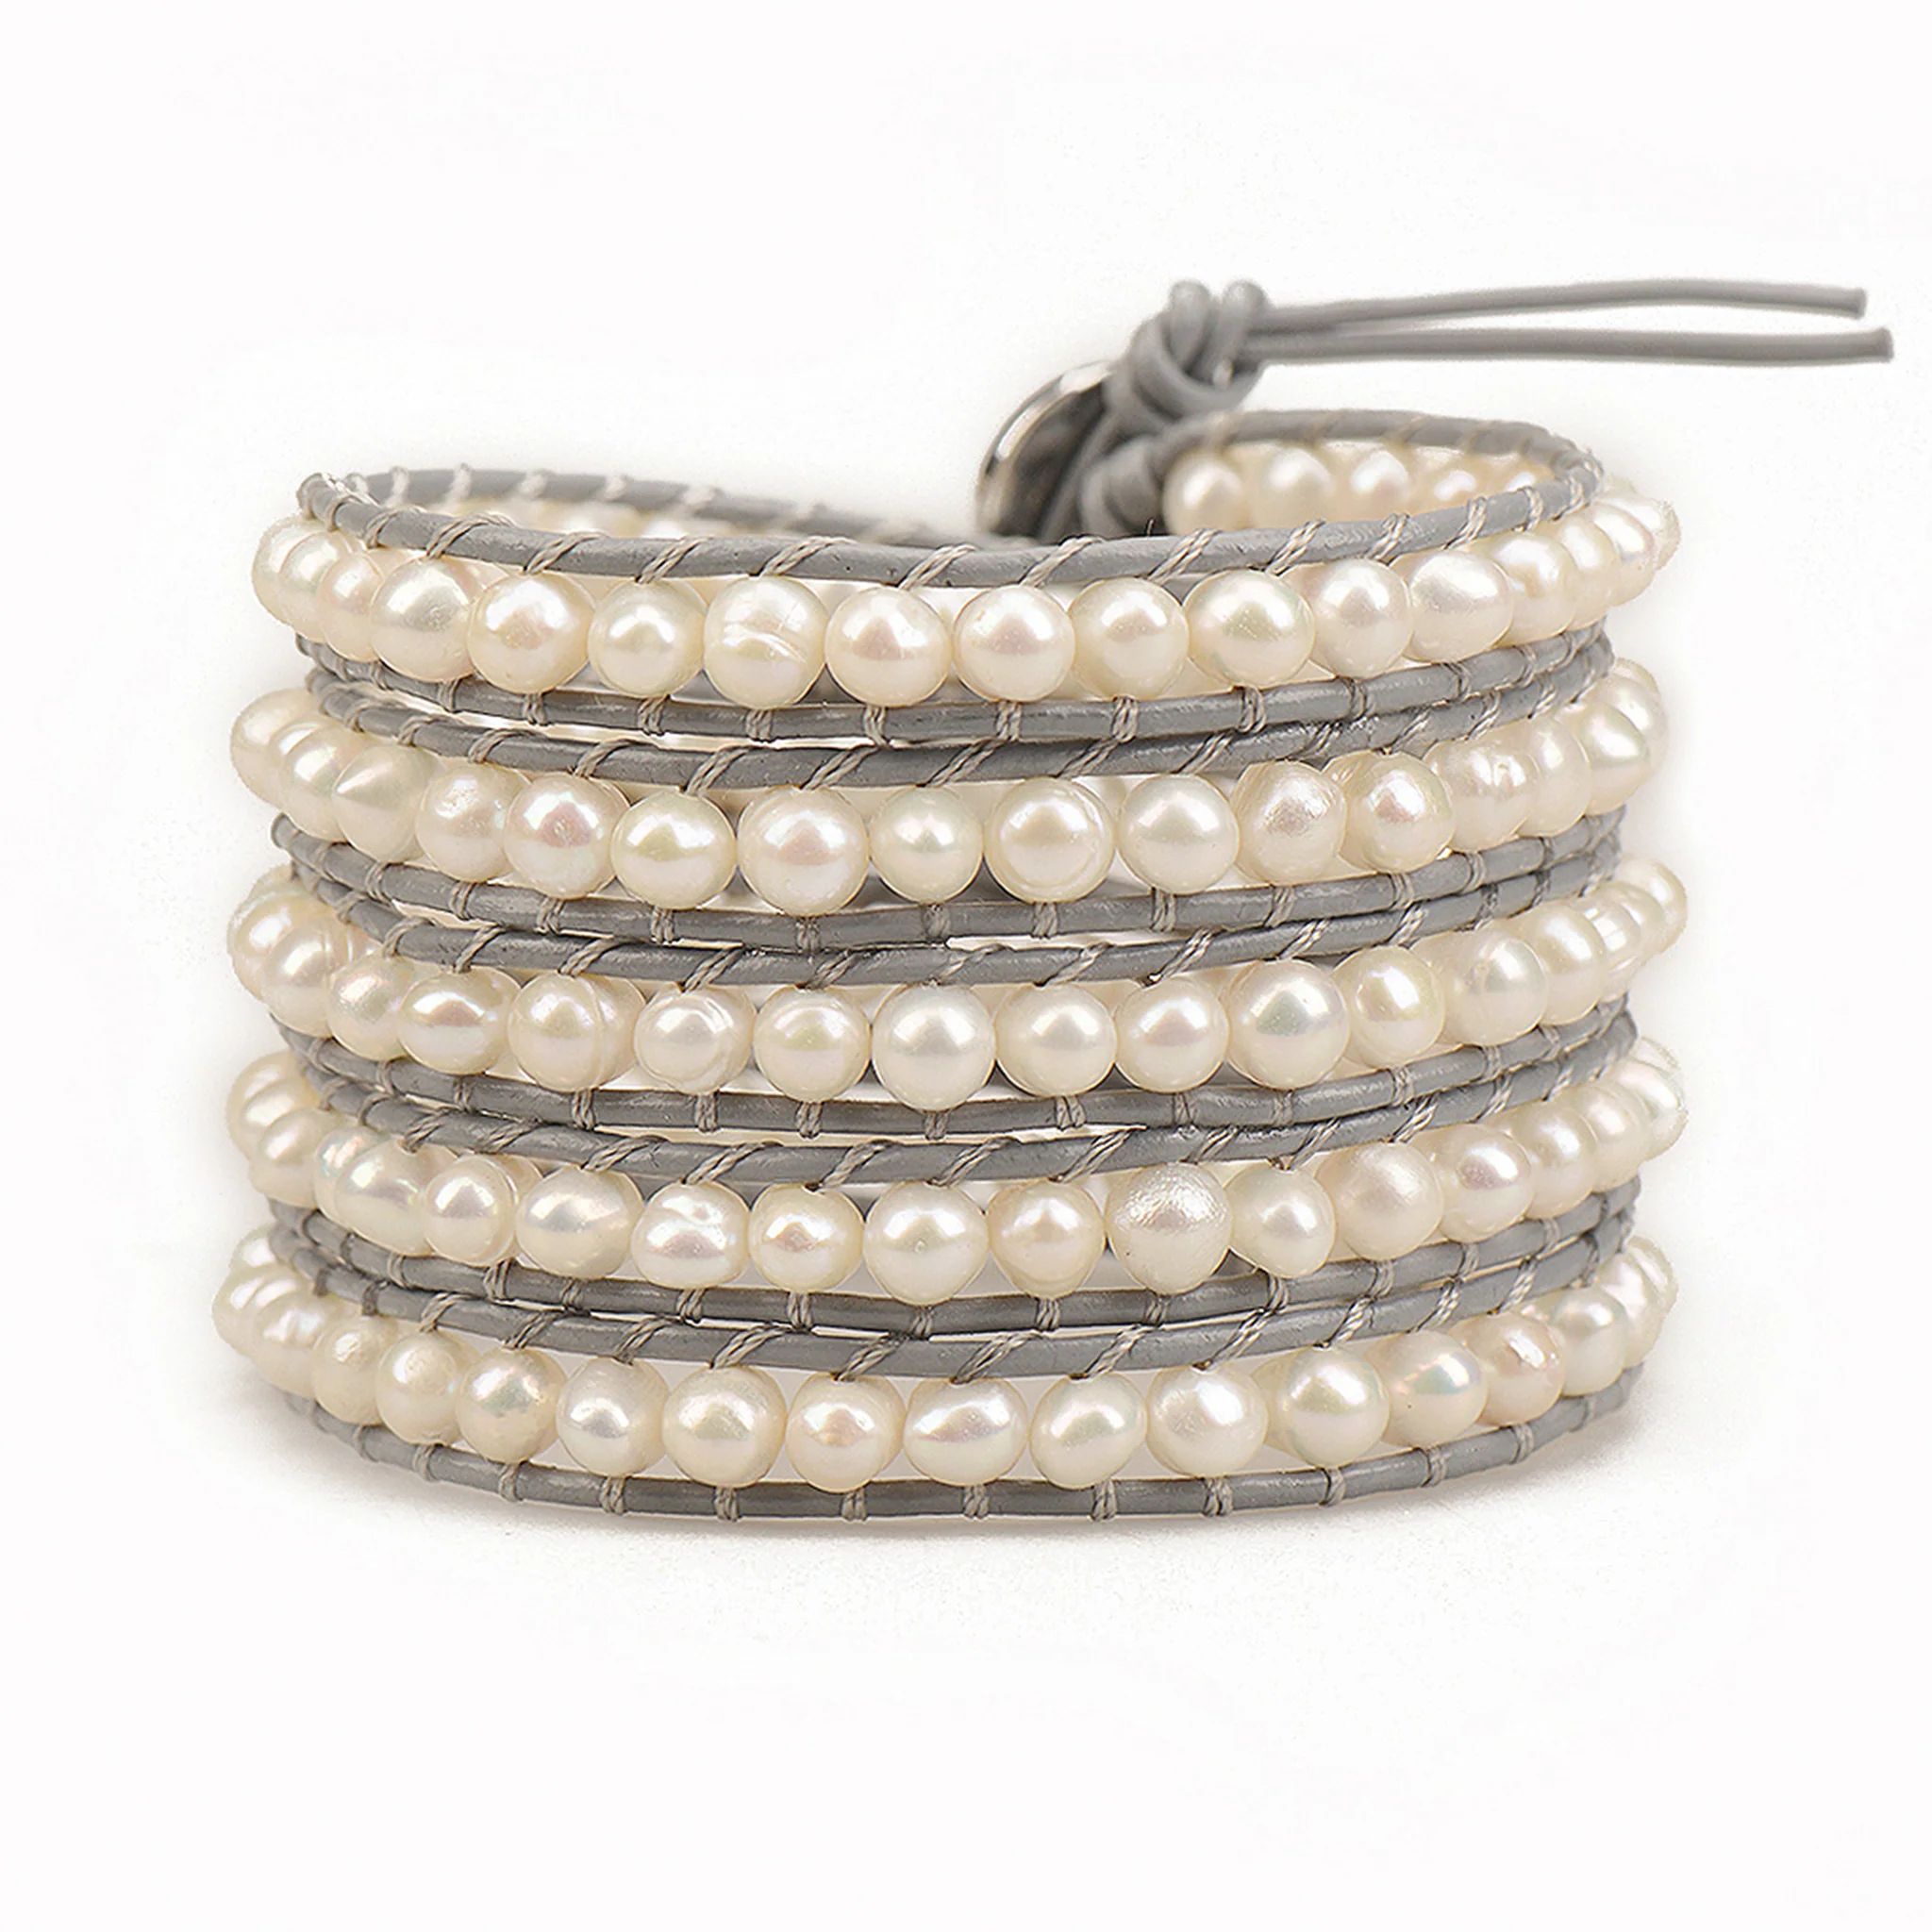 Freshwater Pearls on Gray | Victoria Emerson